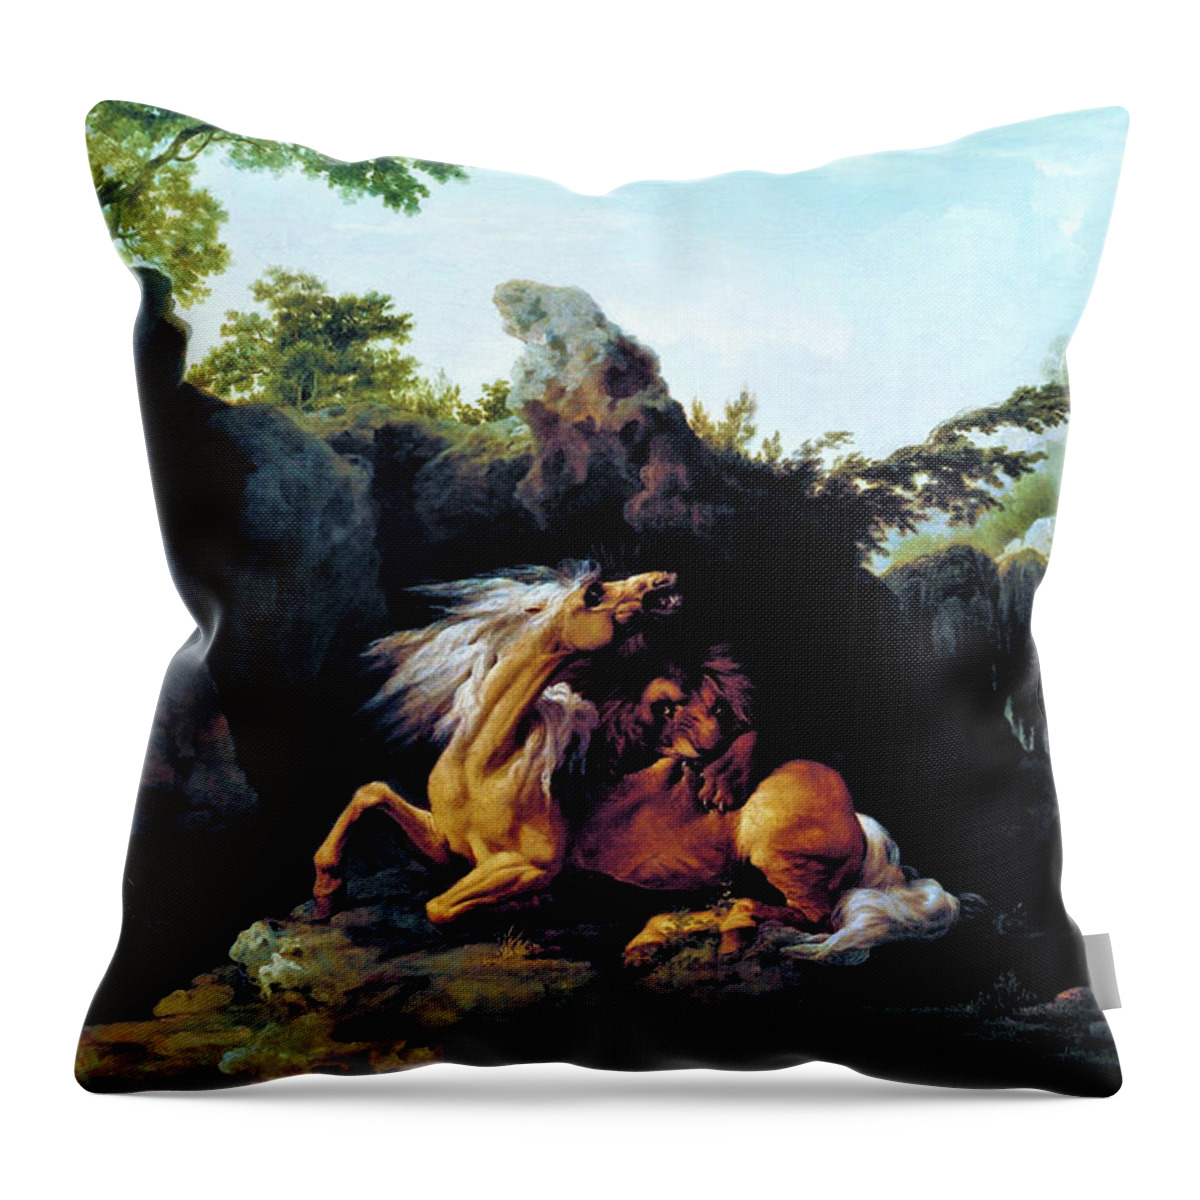 Horse Devoured By A Lion Throw Pillow featuring the painting Horse Devoured by a Lion - Digital Remastered Edition by George Stubbs